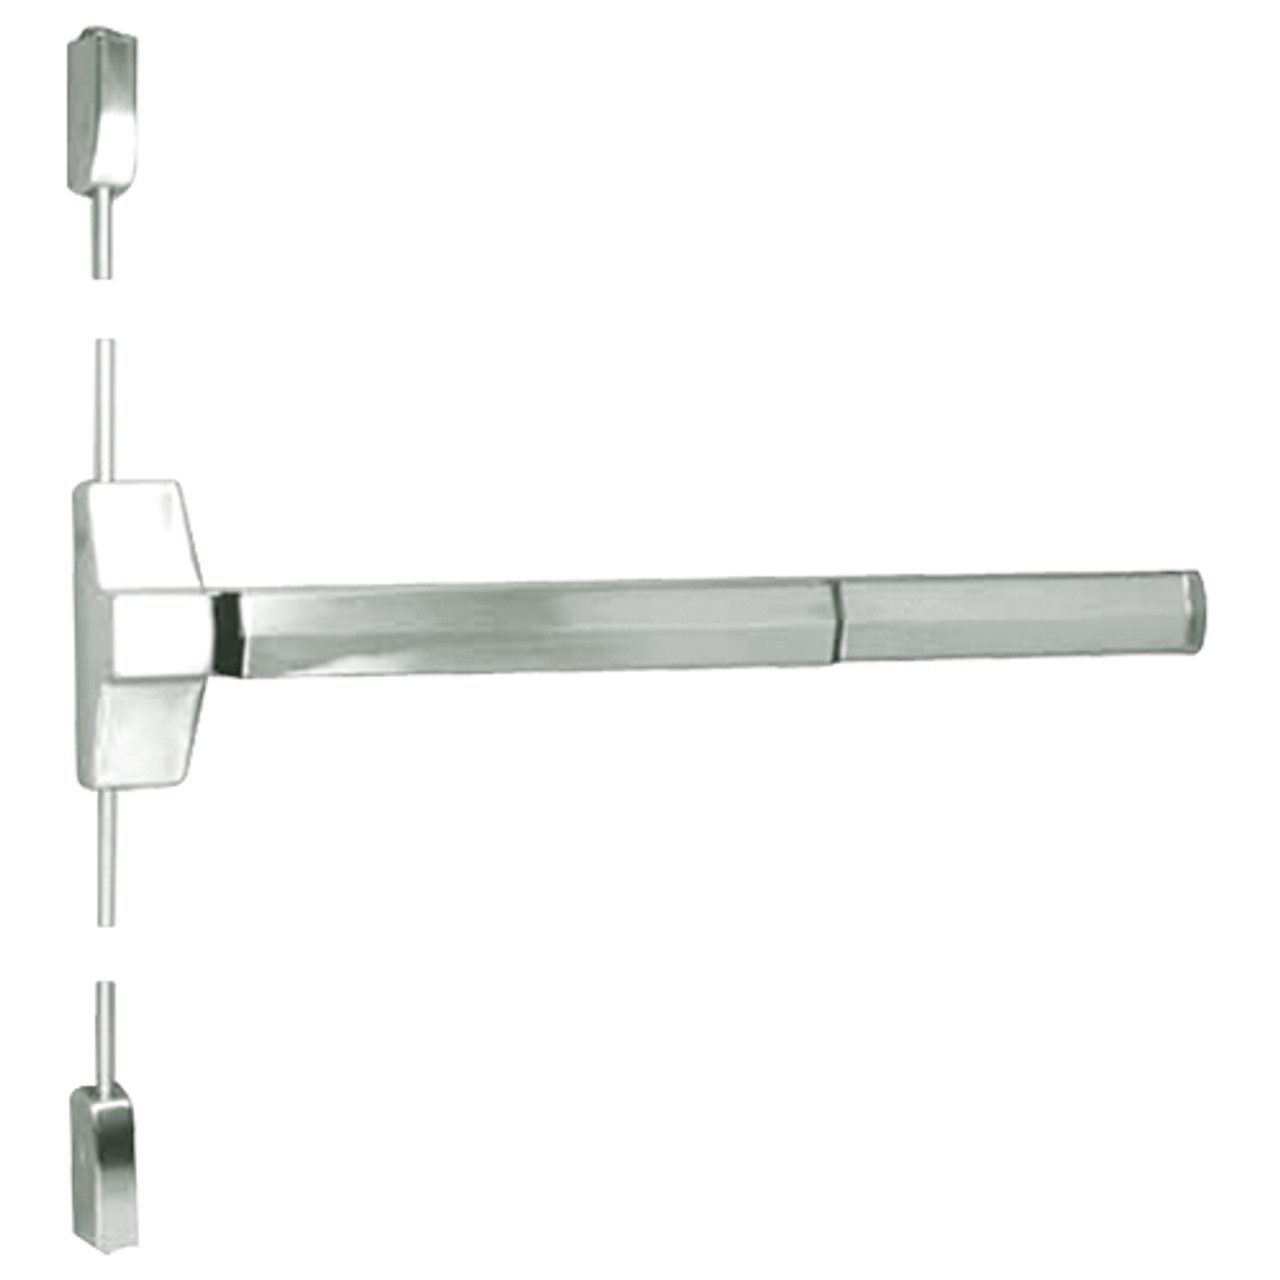 7110F-36-619 Yale 7000 Series Fire Rated Surface Vertical Rod Exit Device in Satin Nickel